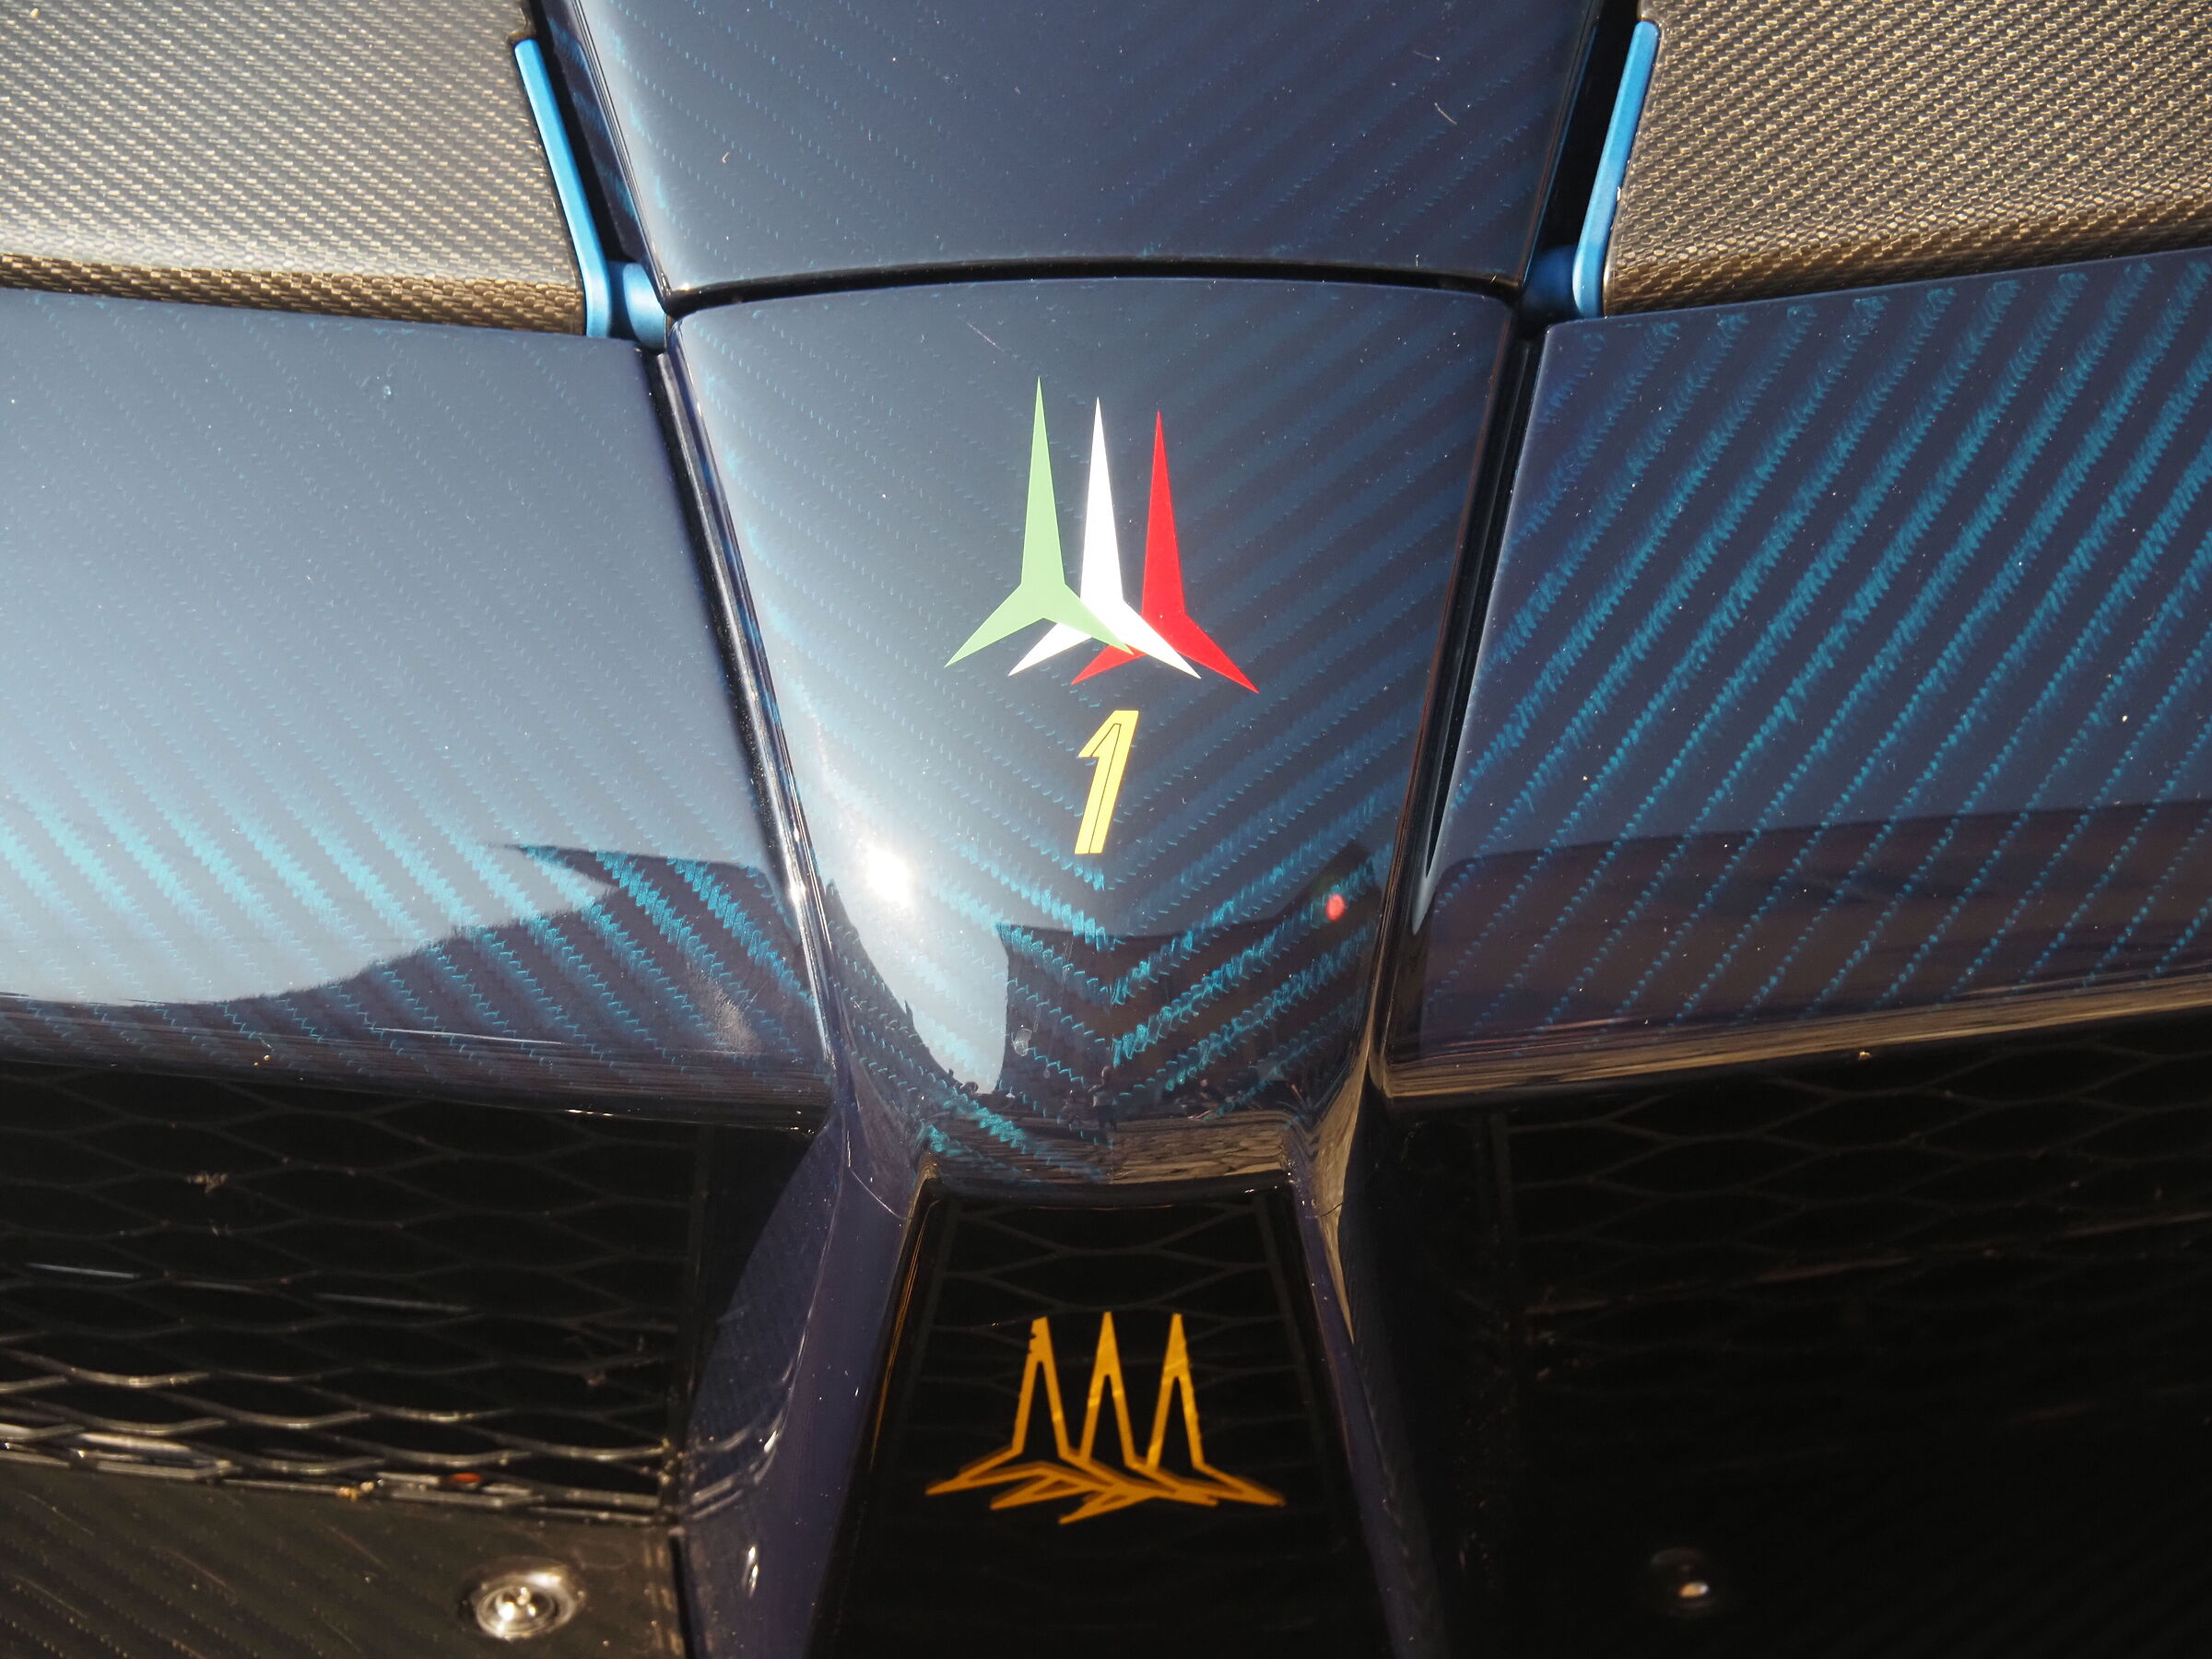 When the Pagani 6 is celebrated in Modena...